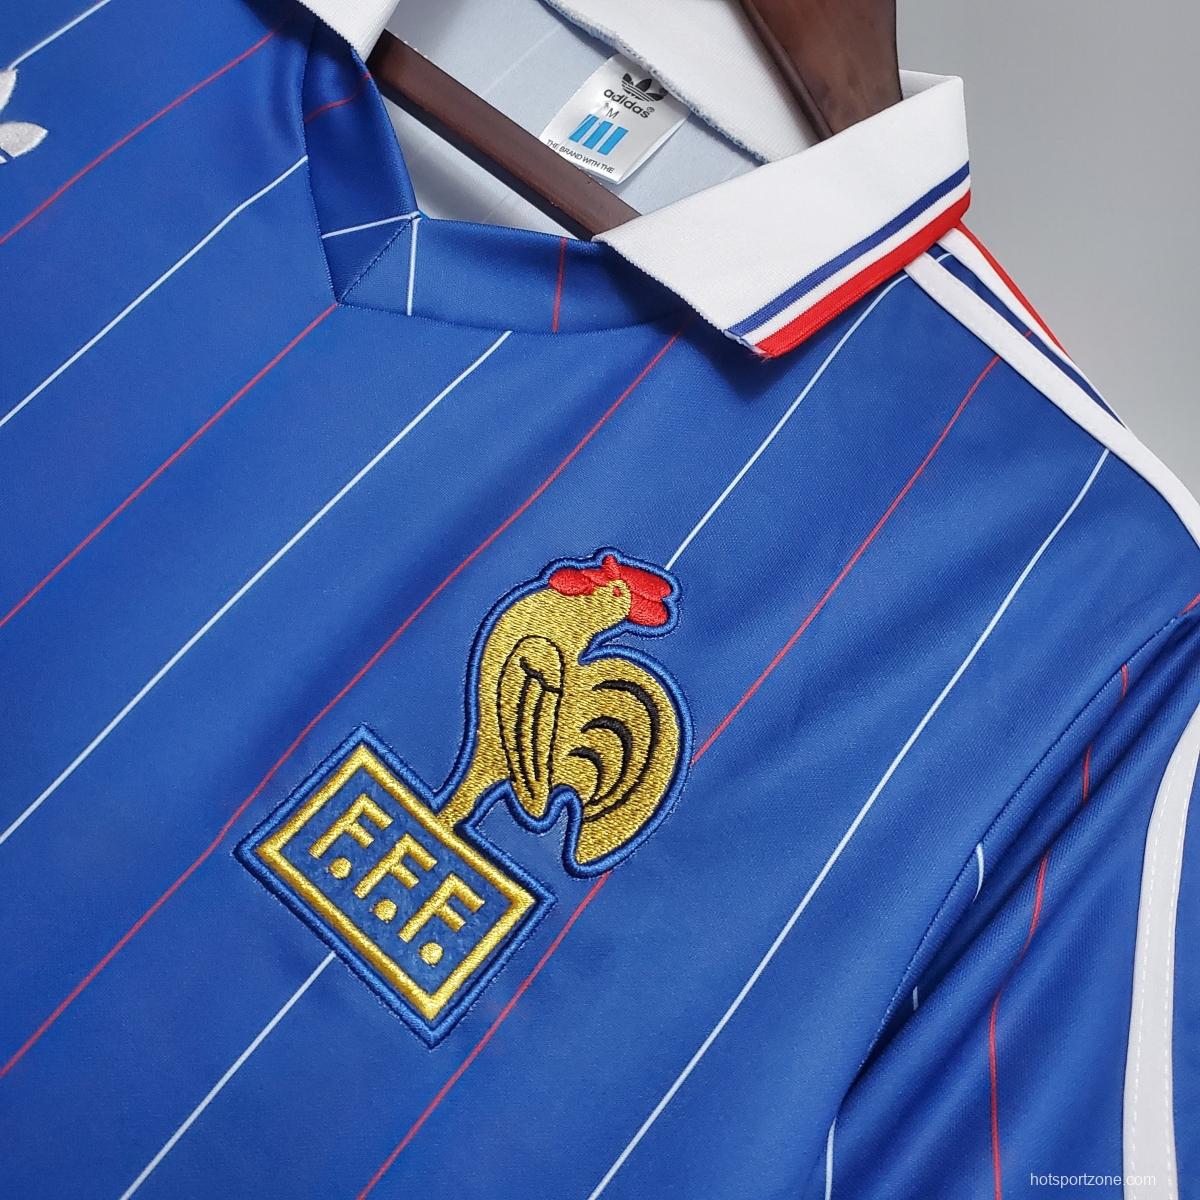 Retro France 1982 home Soccer Jersey